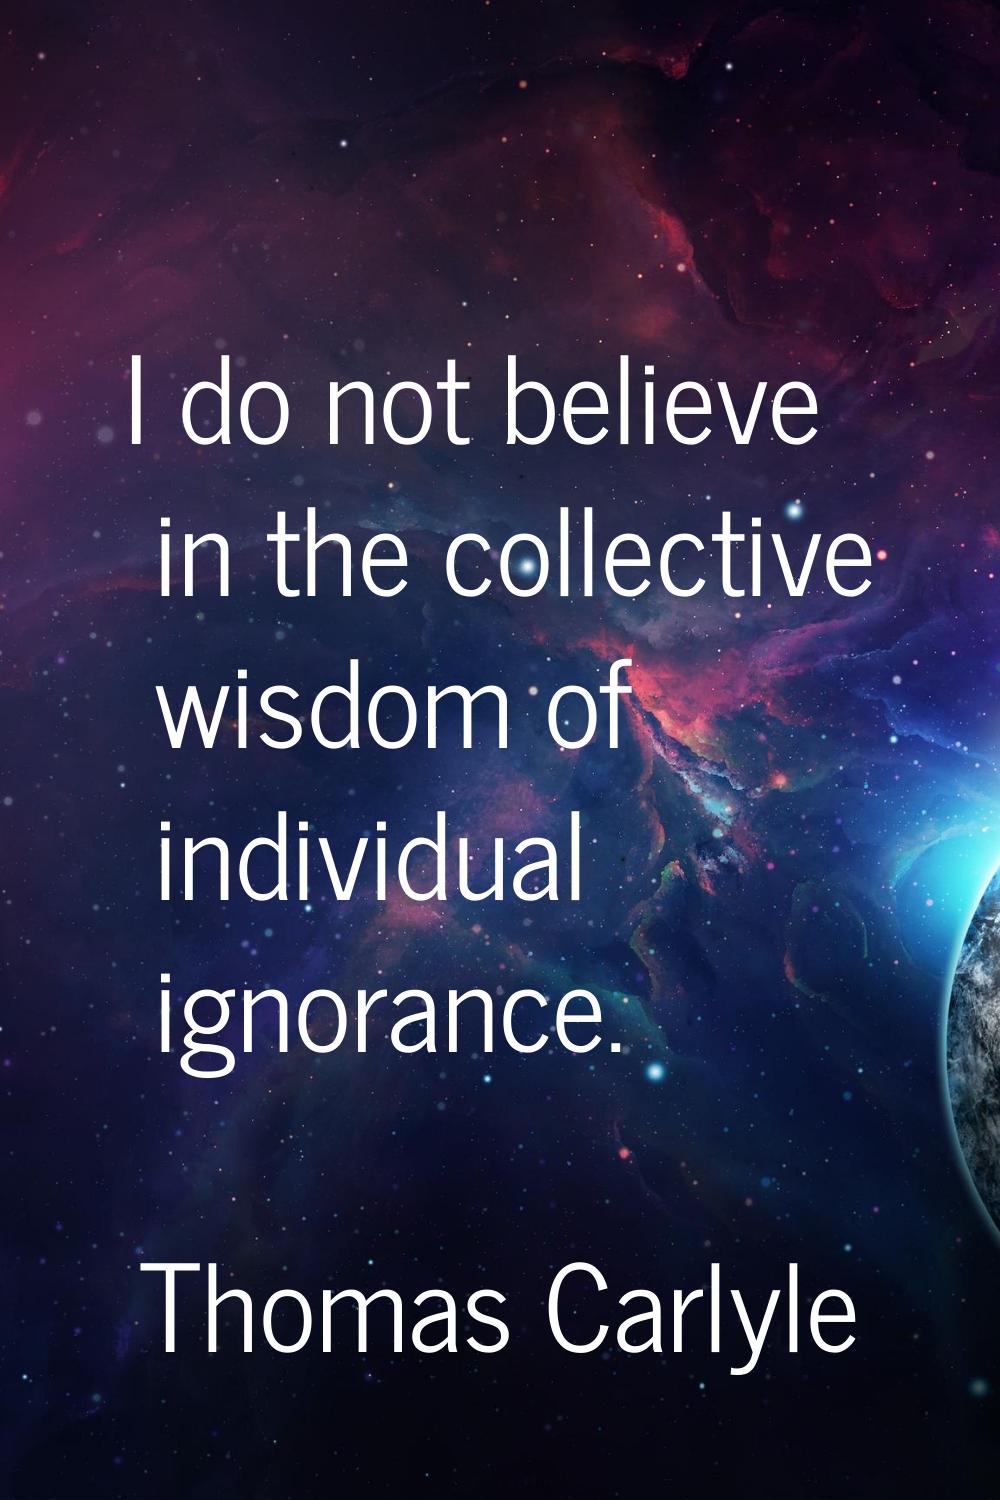 I do not believe in the collective wisdom of individual ignorance.